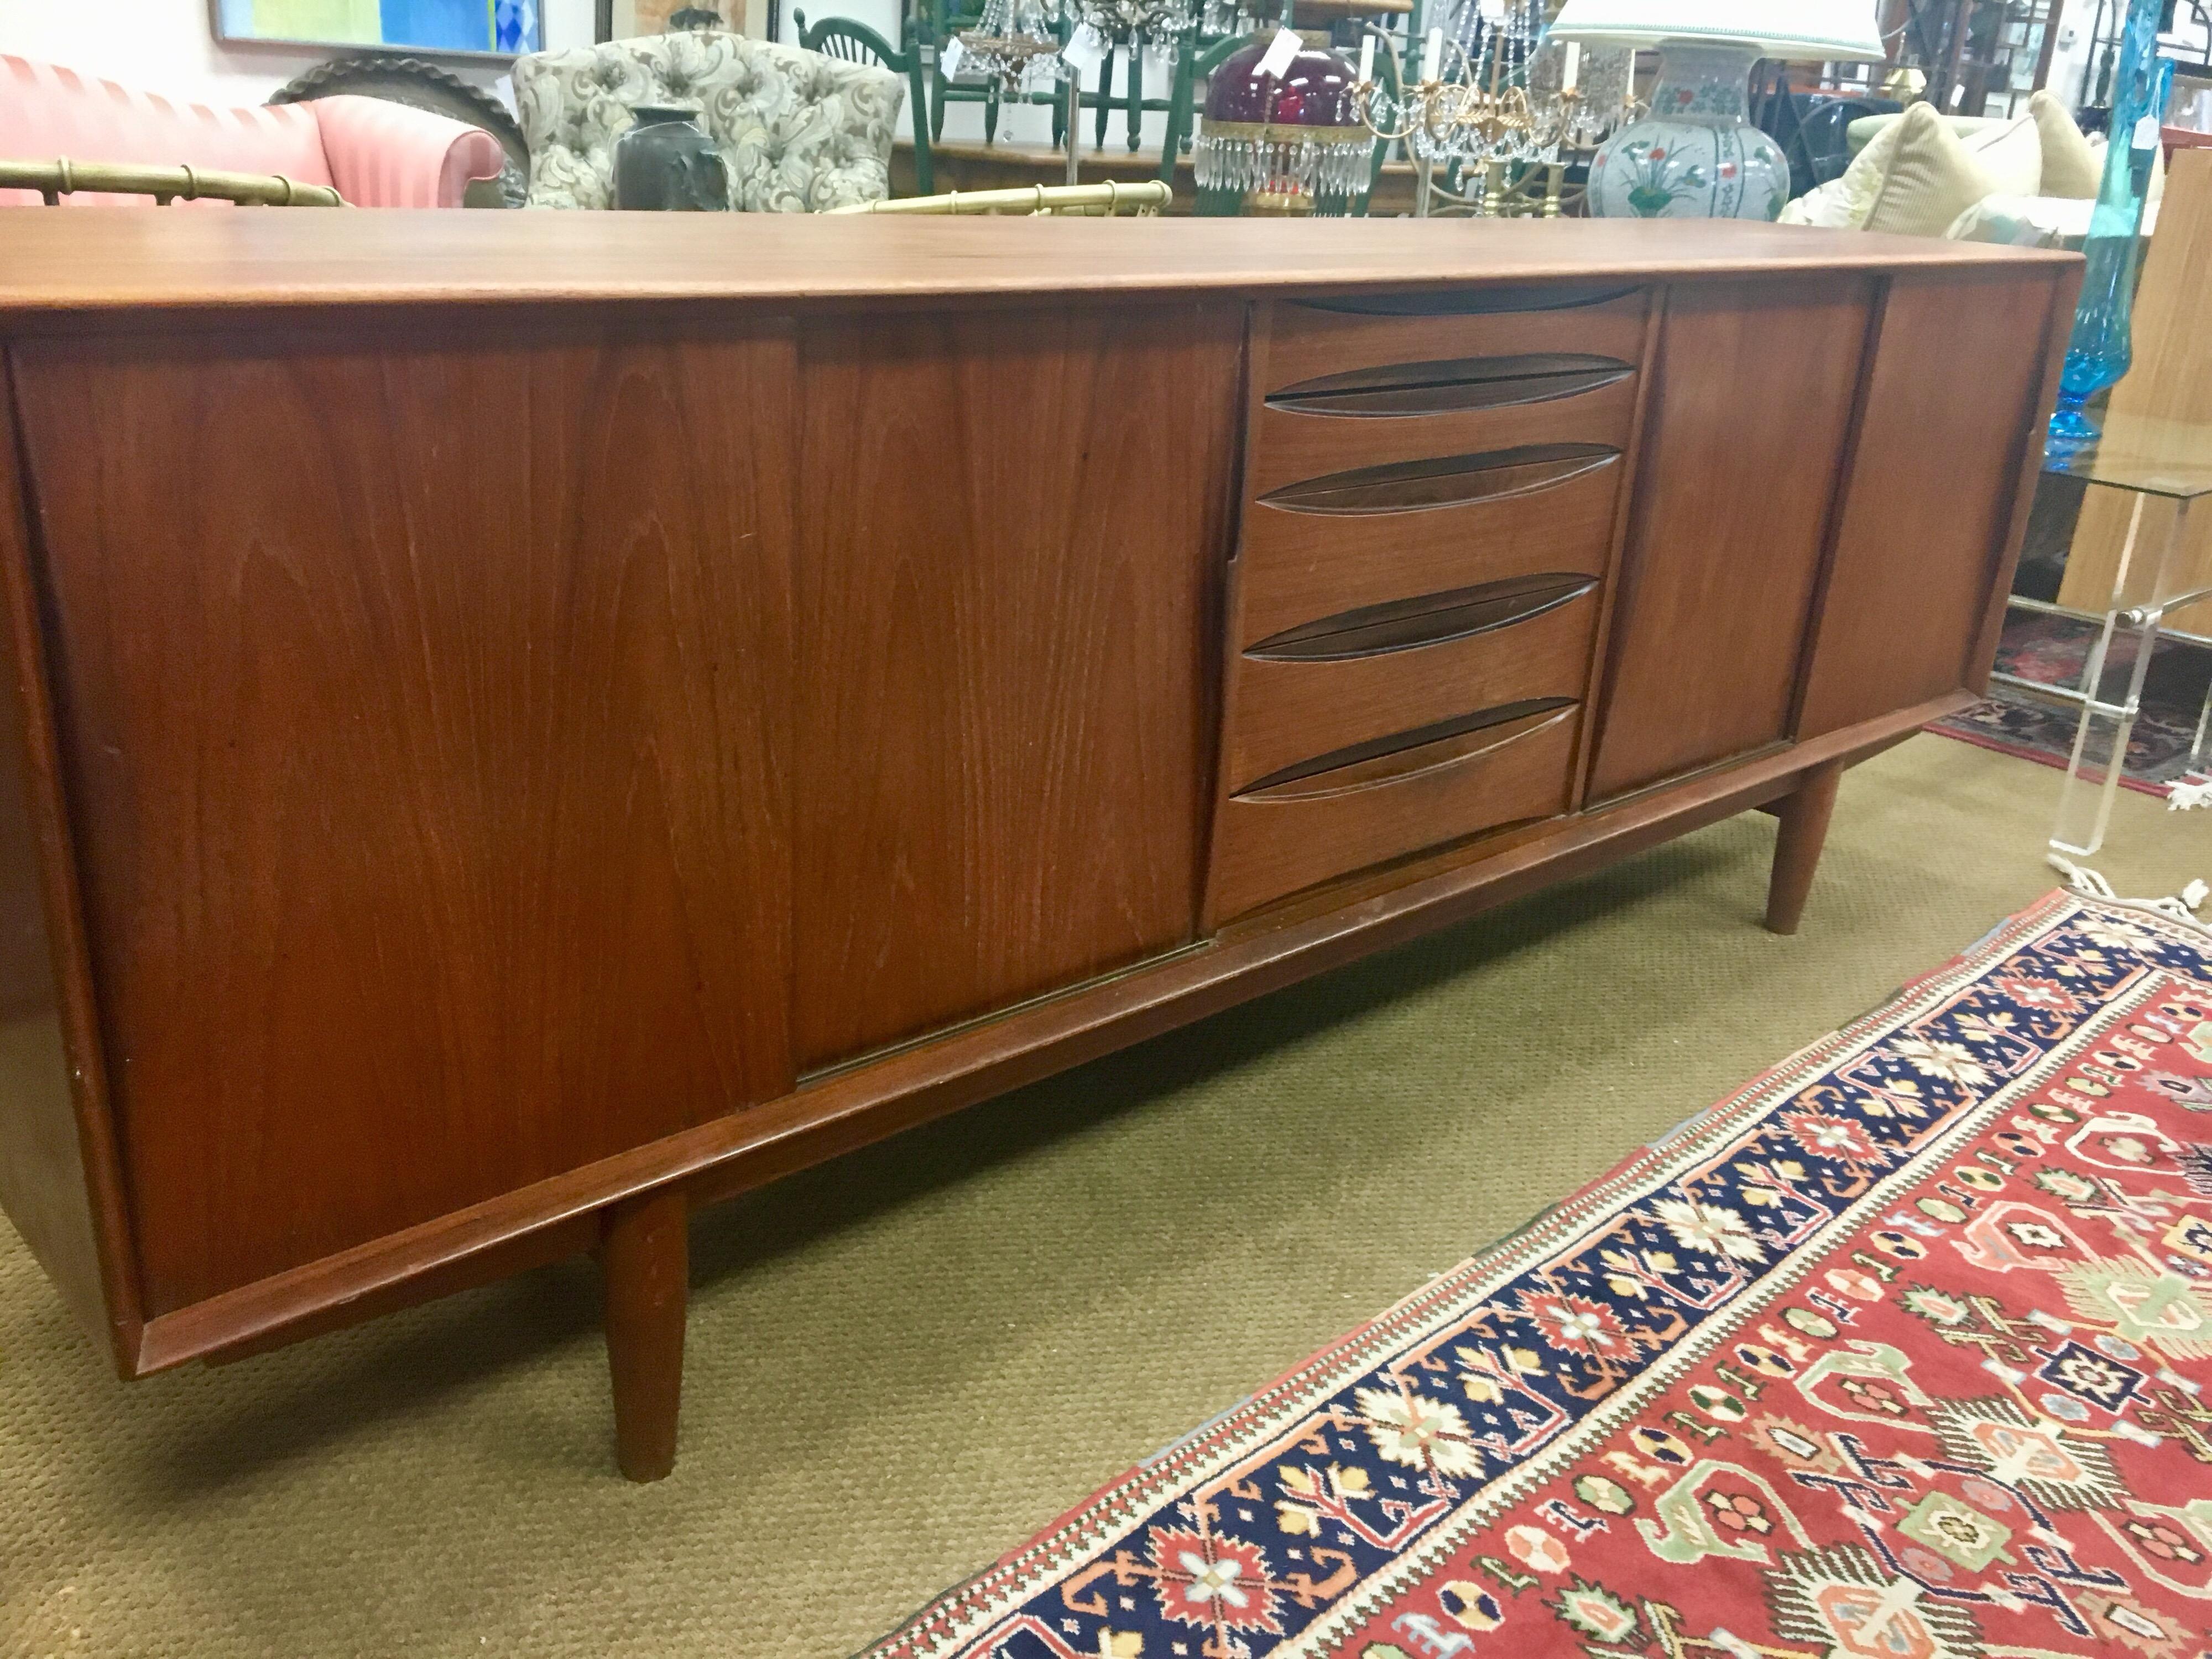 Danish modern teak buffet bar is exquisite throughout and is attributed to Arne Vodder for Dyrlund. Featuring a center bank of bow-tie shaped drawers, with all hardwood construction and dovetail joins (the top two are slimmer and felt lined). One